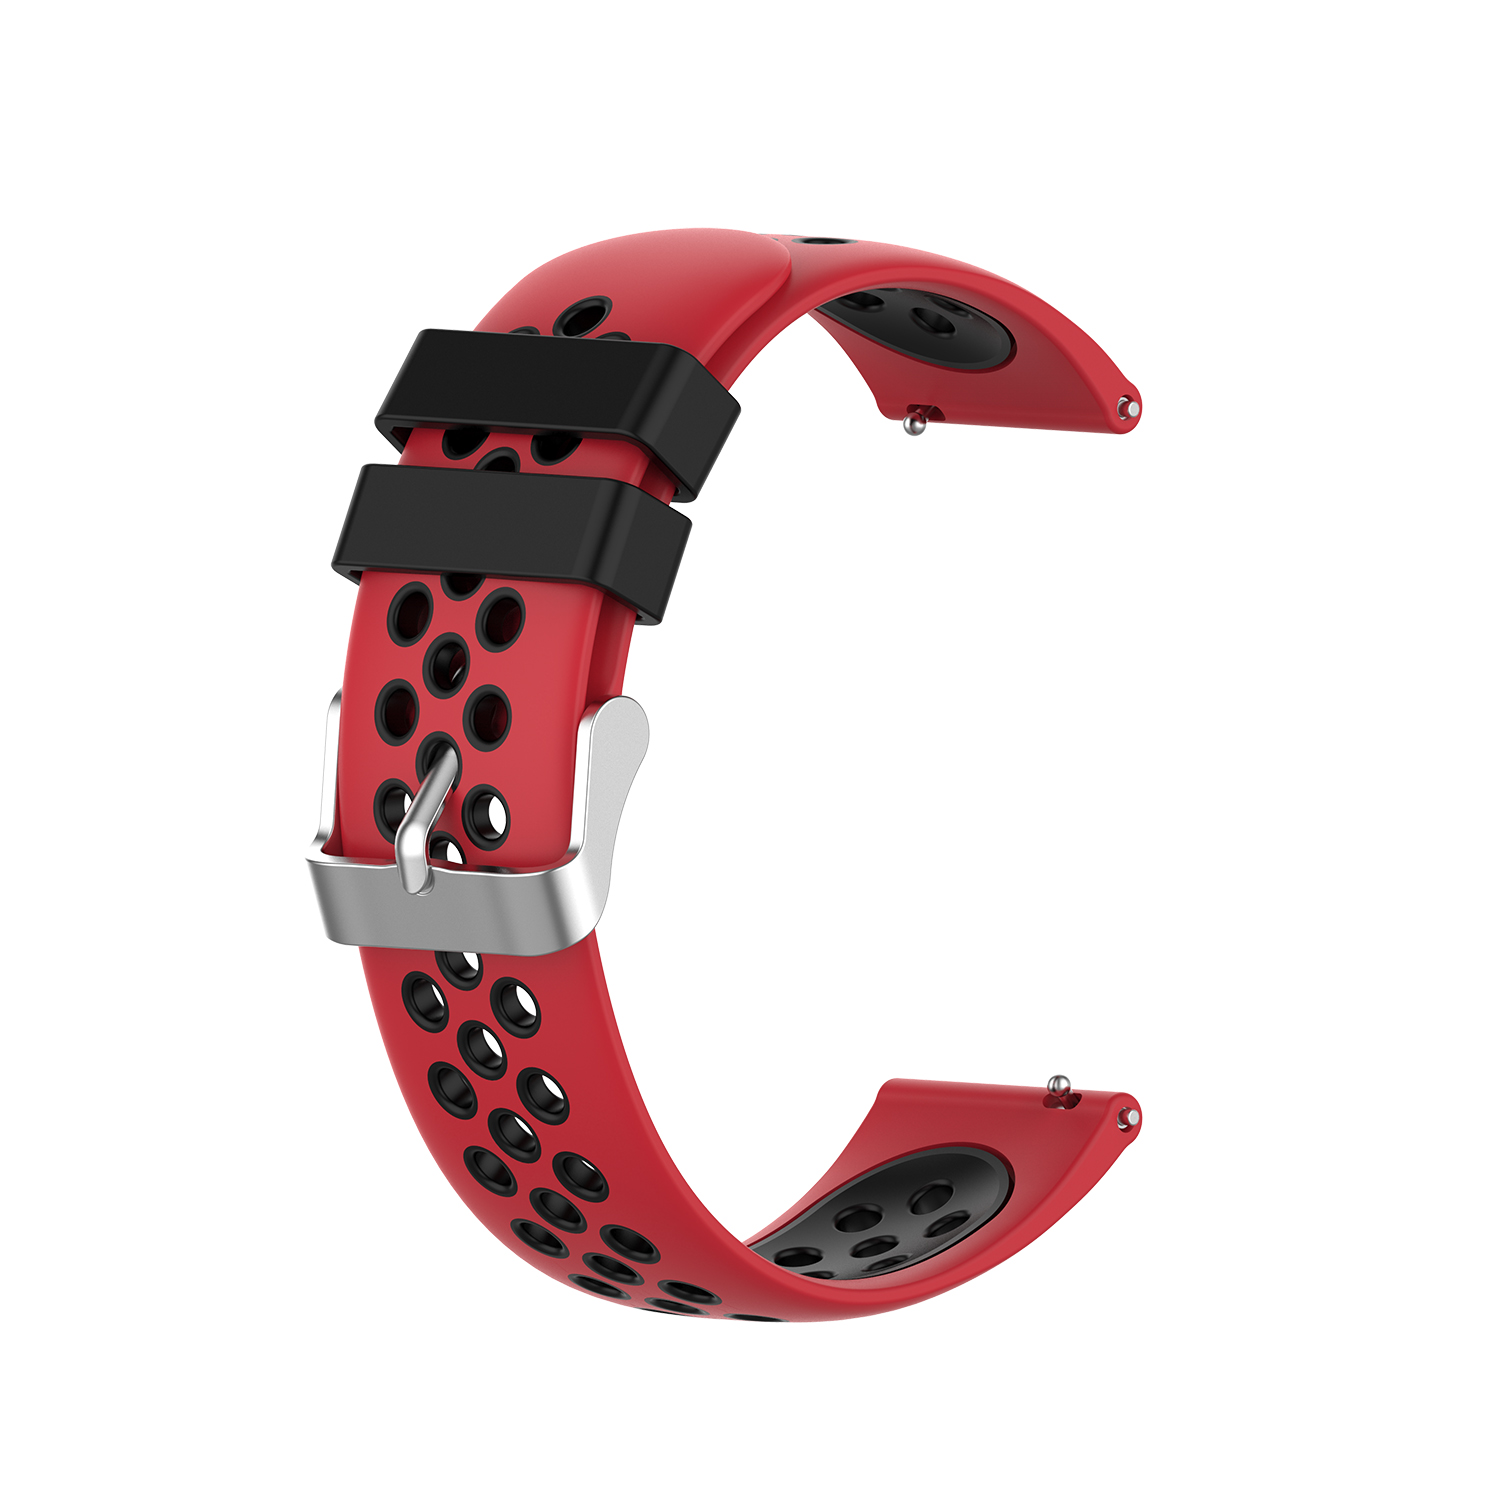 Bakeey-2022mm-Width-Universal-Sports-Dot-Pattern-Soft-Silicone-Watch-Band-Strap-Replacement-for-Sams-1737704-20